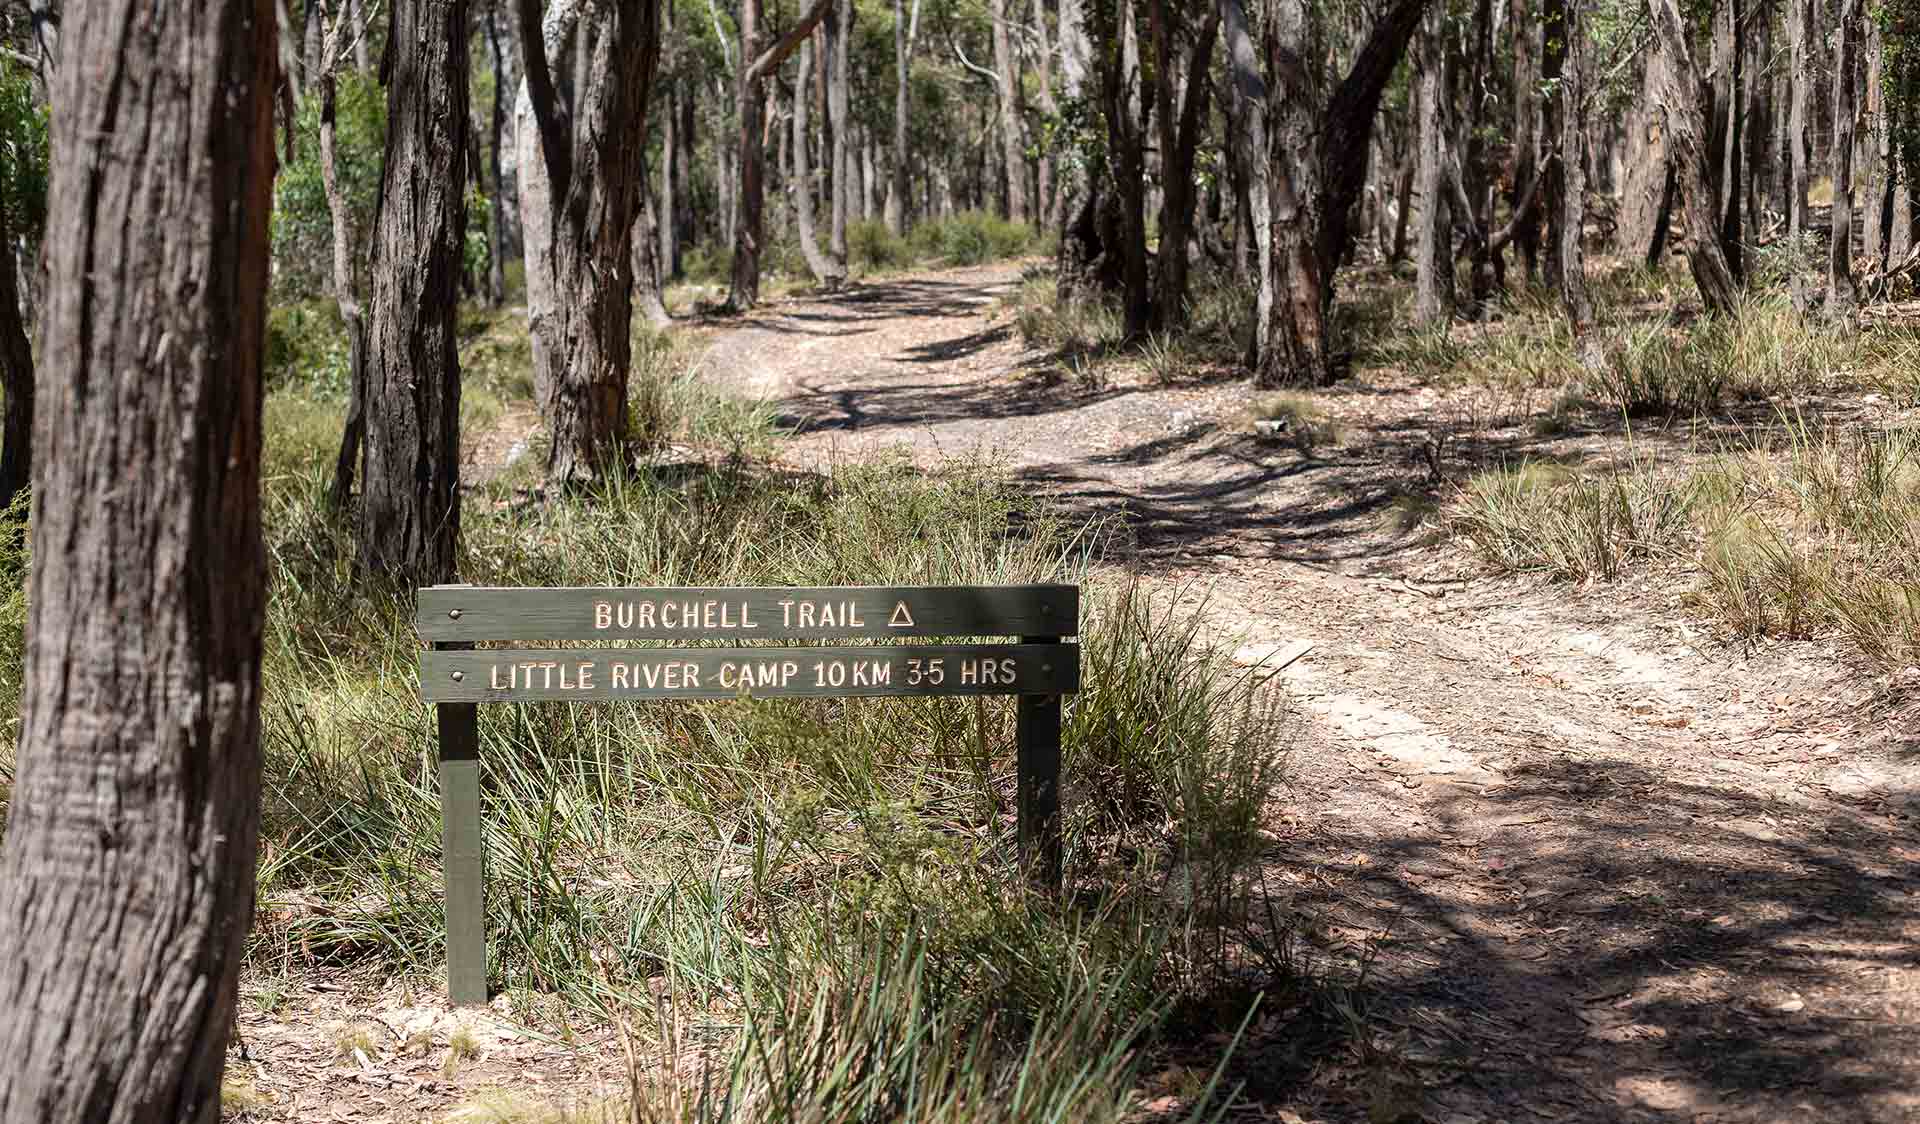 The Trailhead to the Burchell Trail at Brisbane Ranges National Park